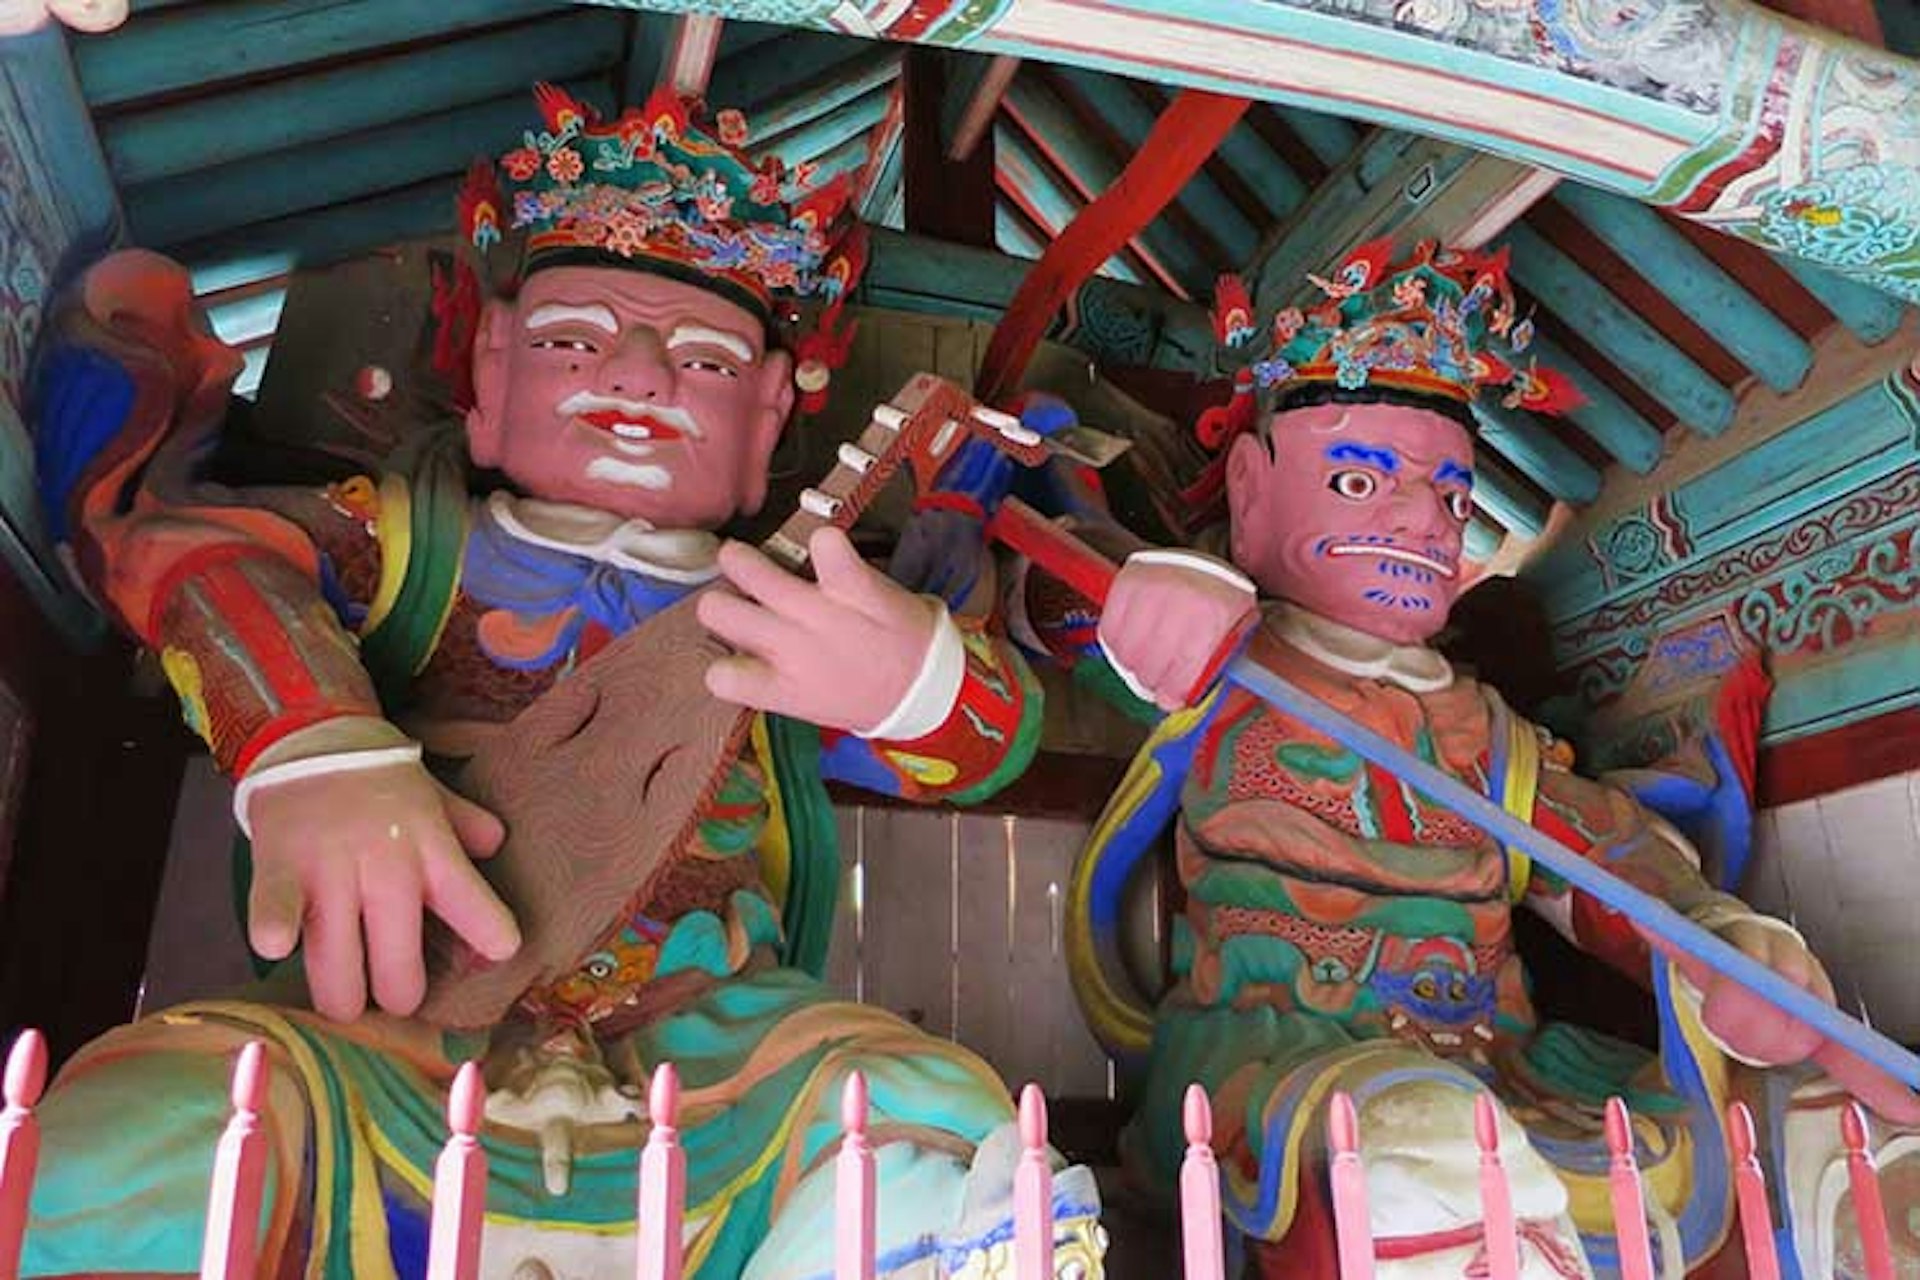 Two of the Heavenly Kings guard the entrance to the temple. Image by Megan Eaves / Lonely Planet